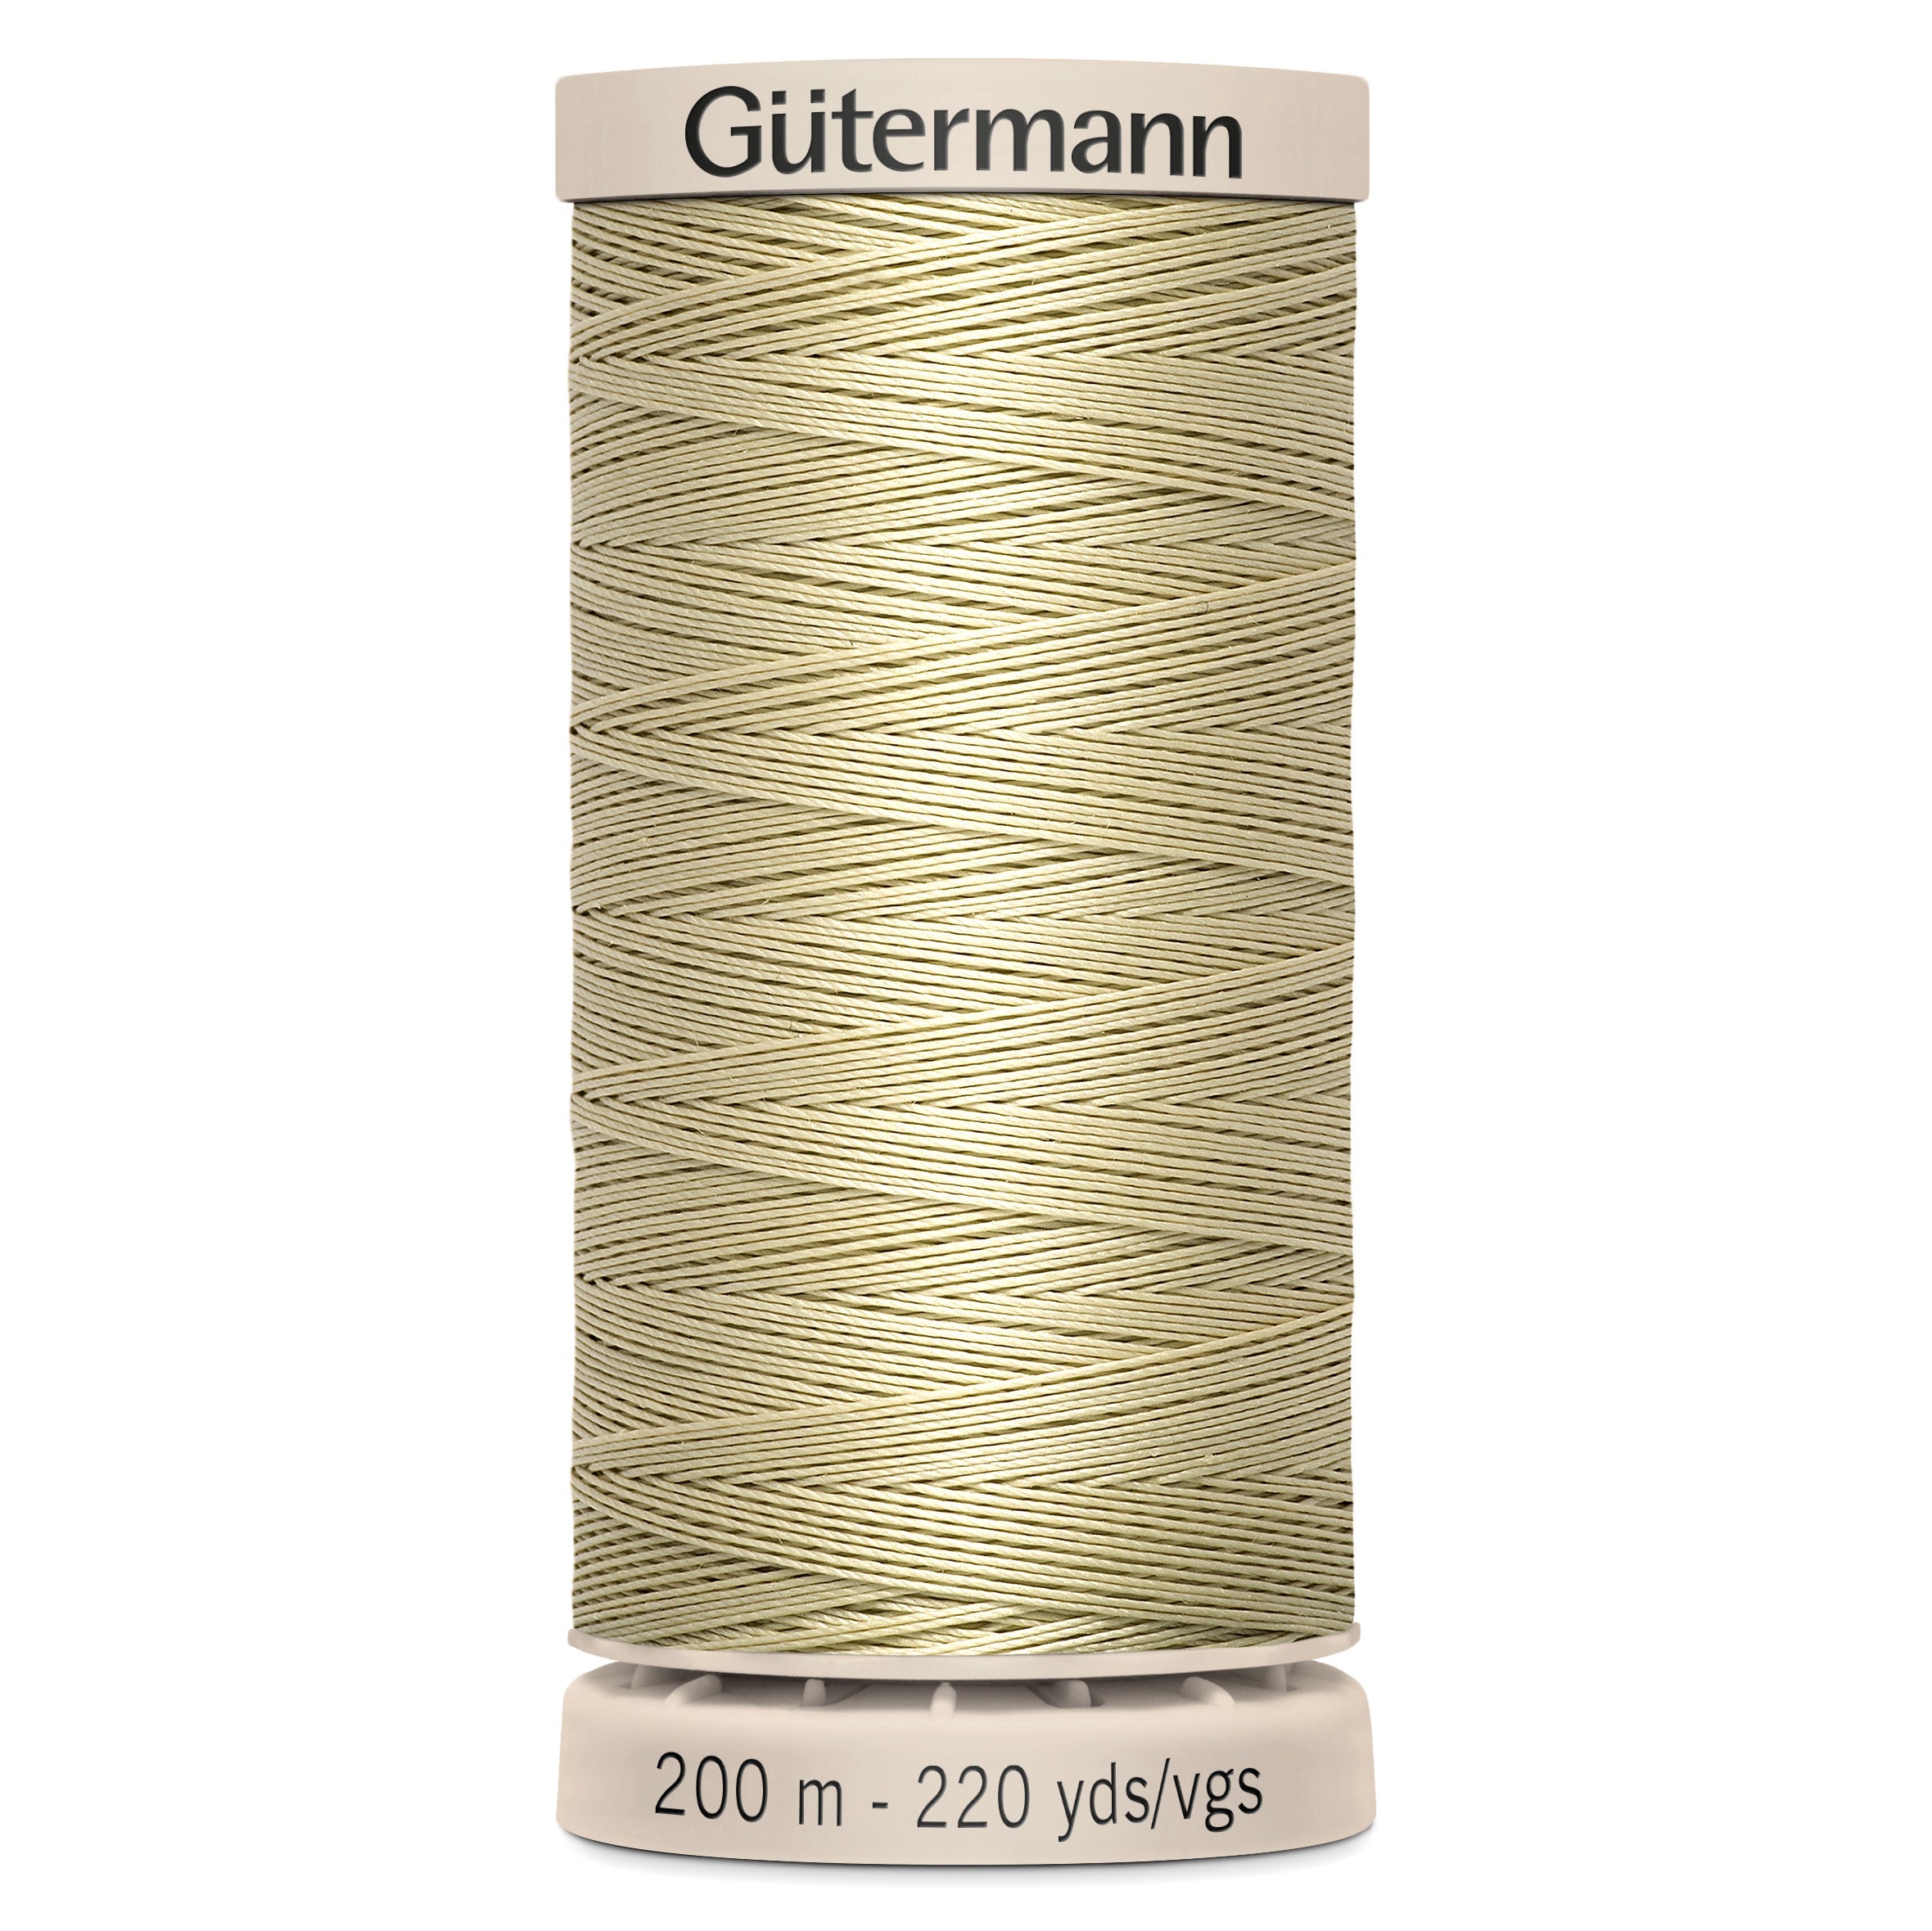 Gutermann Hand Quilting Cotton - 0928 from Jaycotts Sewing Supplies